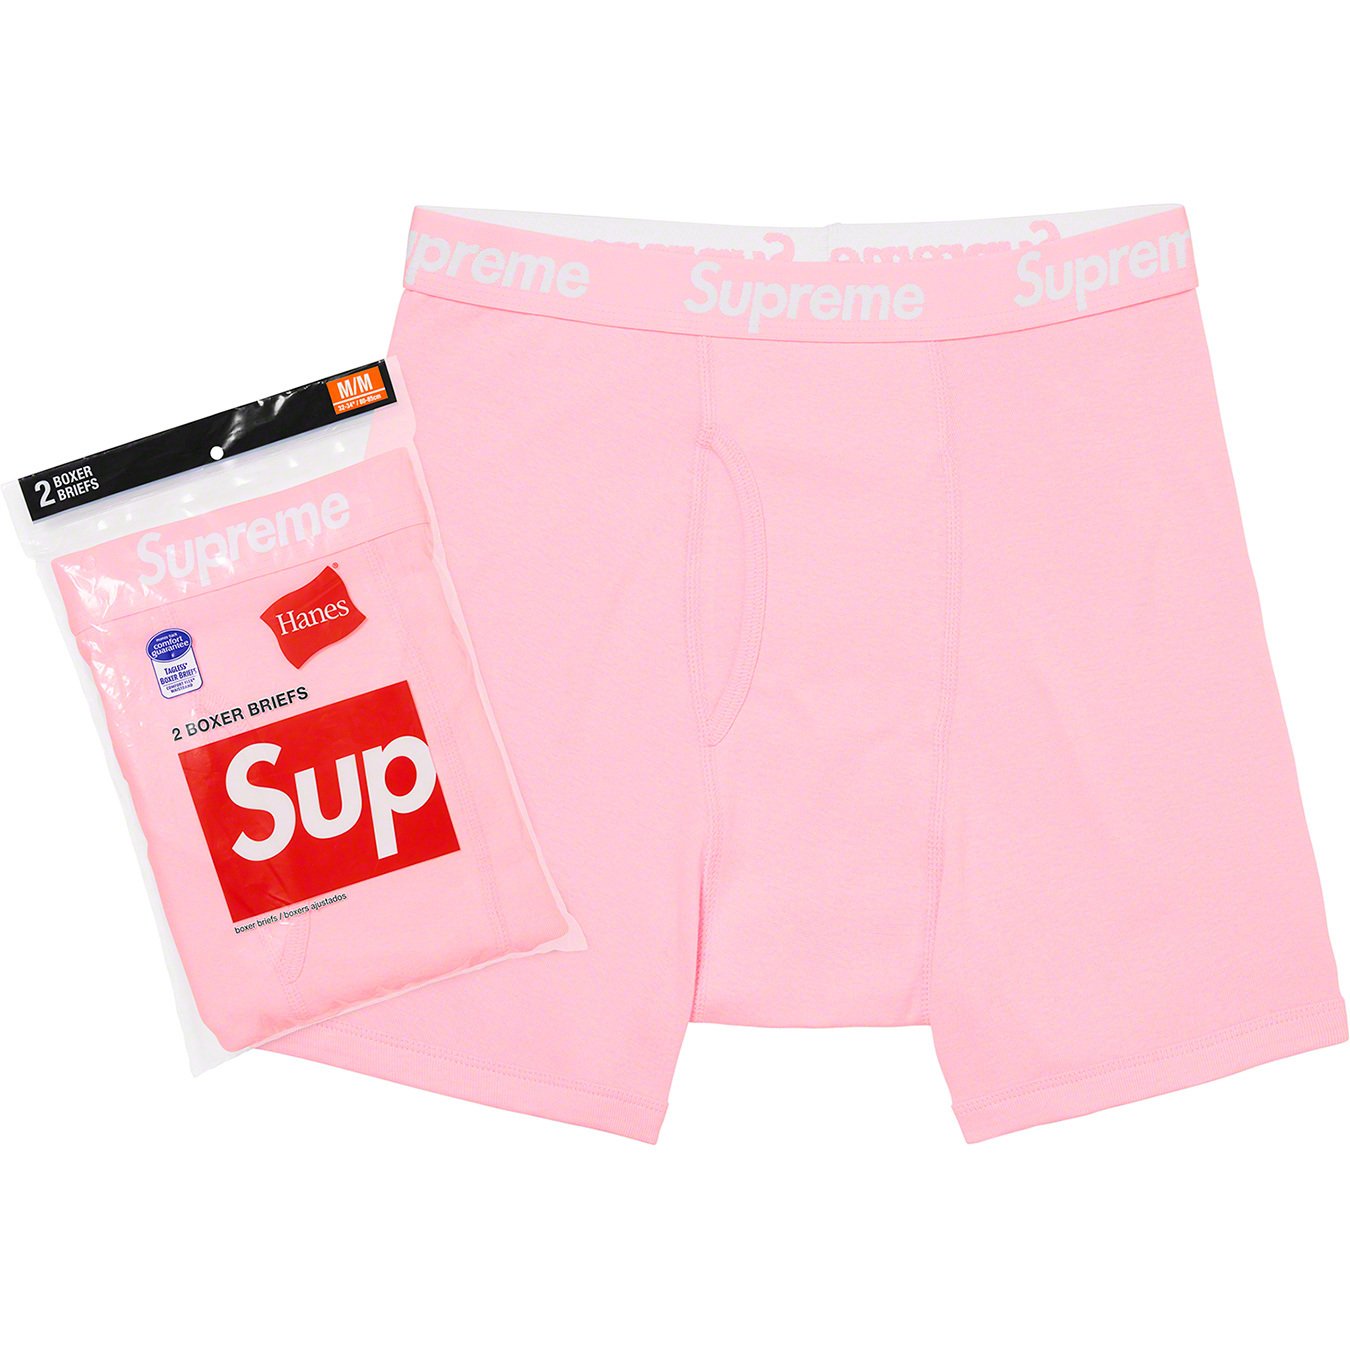 Supreme S Brief Boxers for Sale in Huntington Park, CA - OfferUp